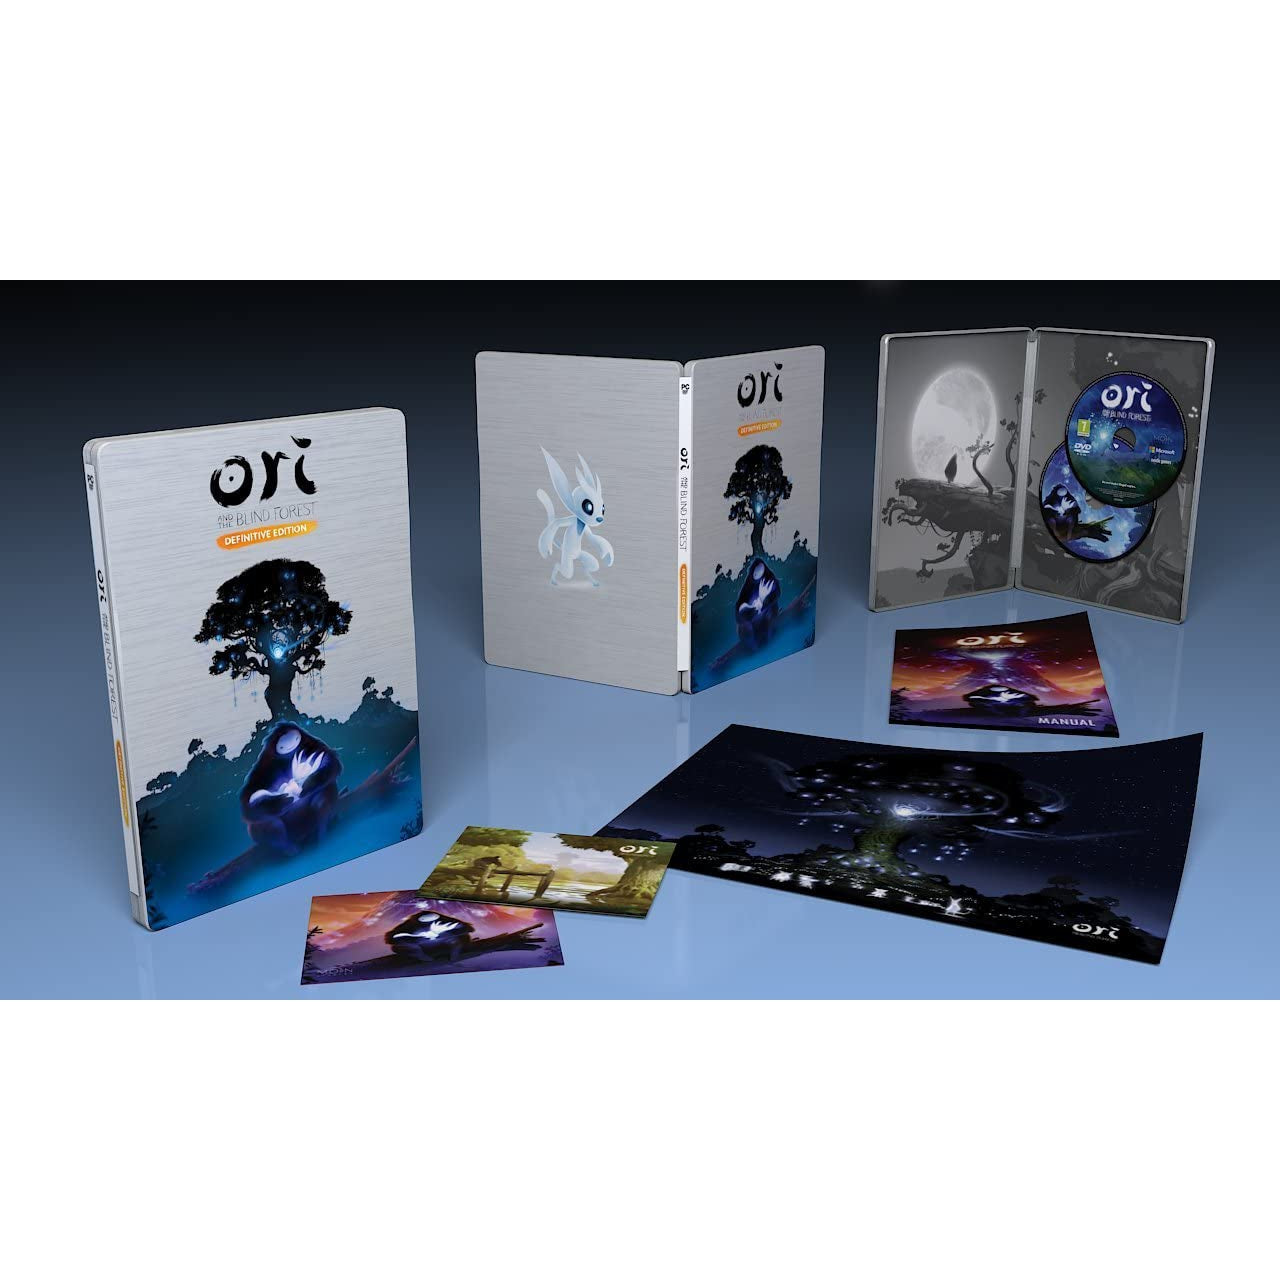 Ori and The Blind Forest Definitive Limited Edition (PC Disc)